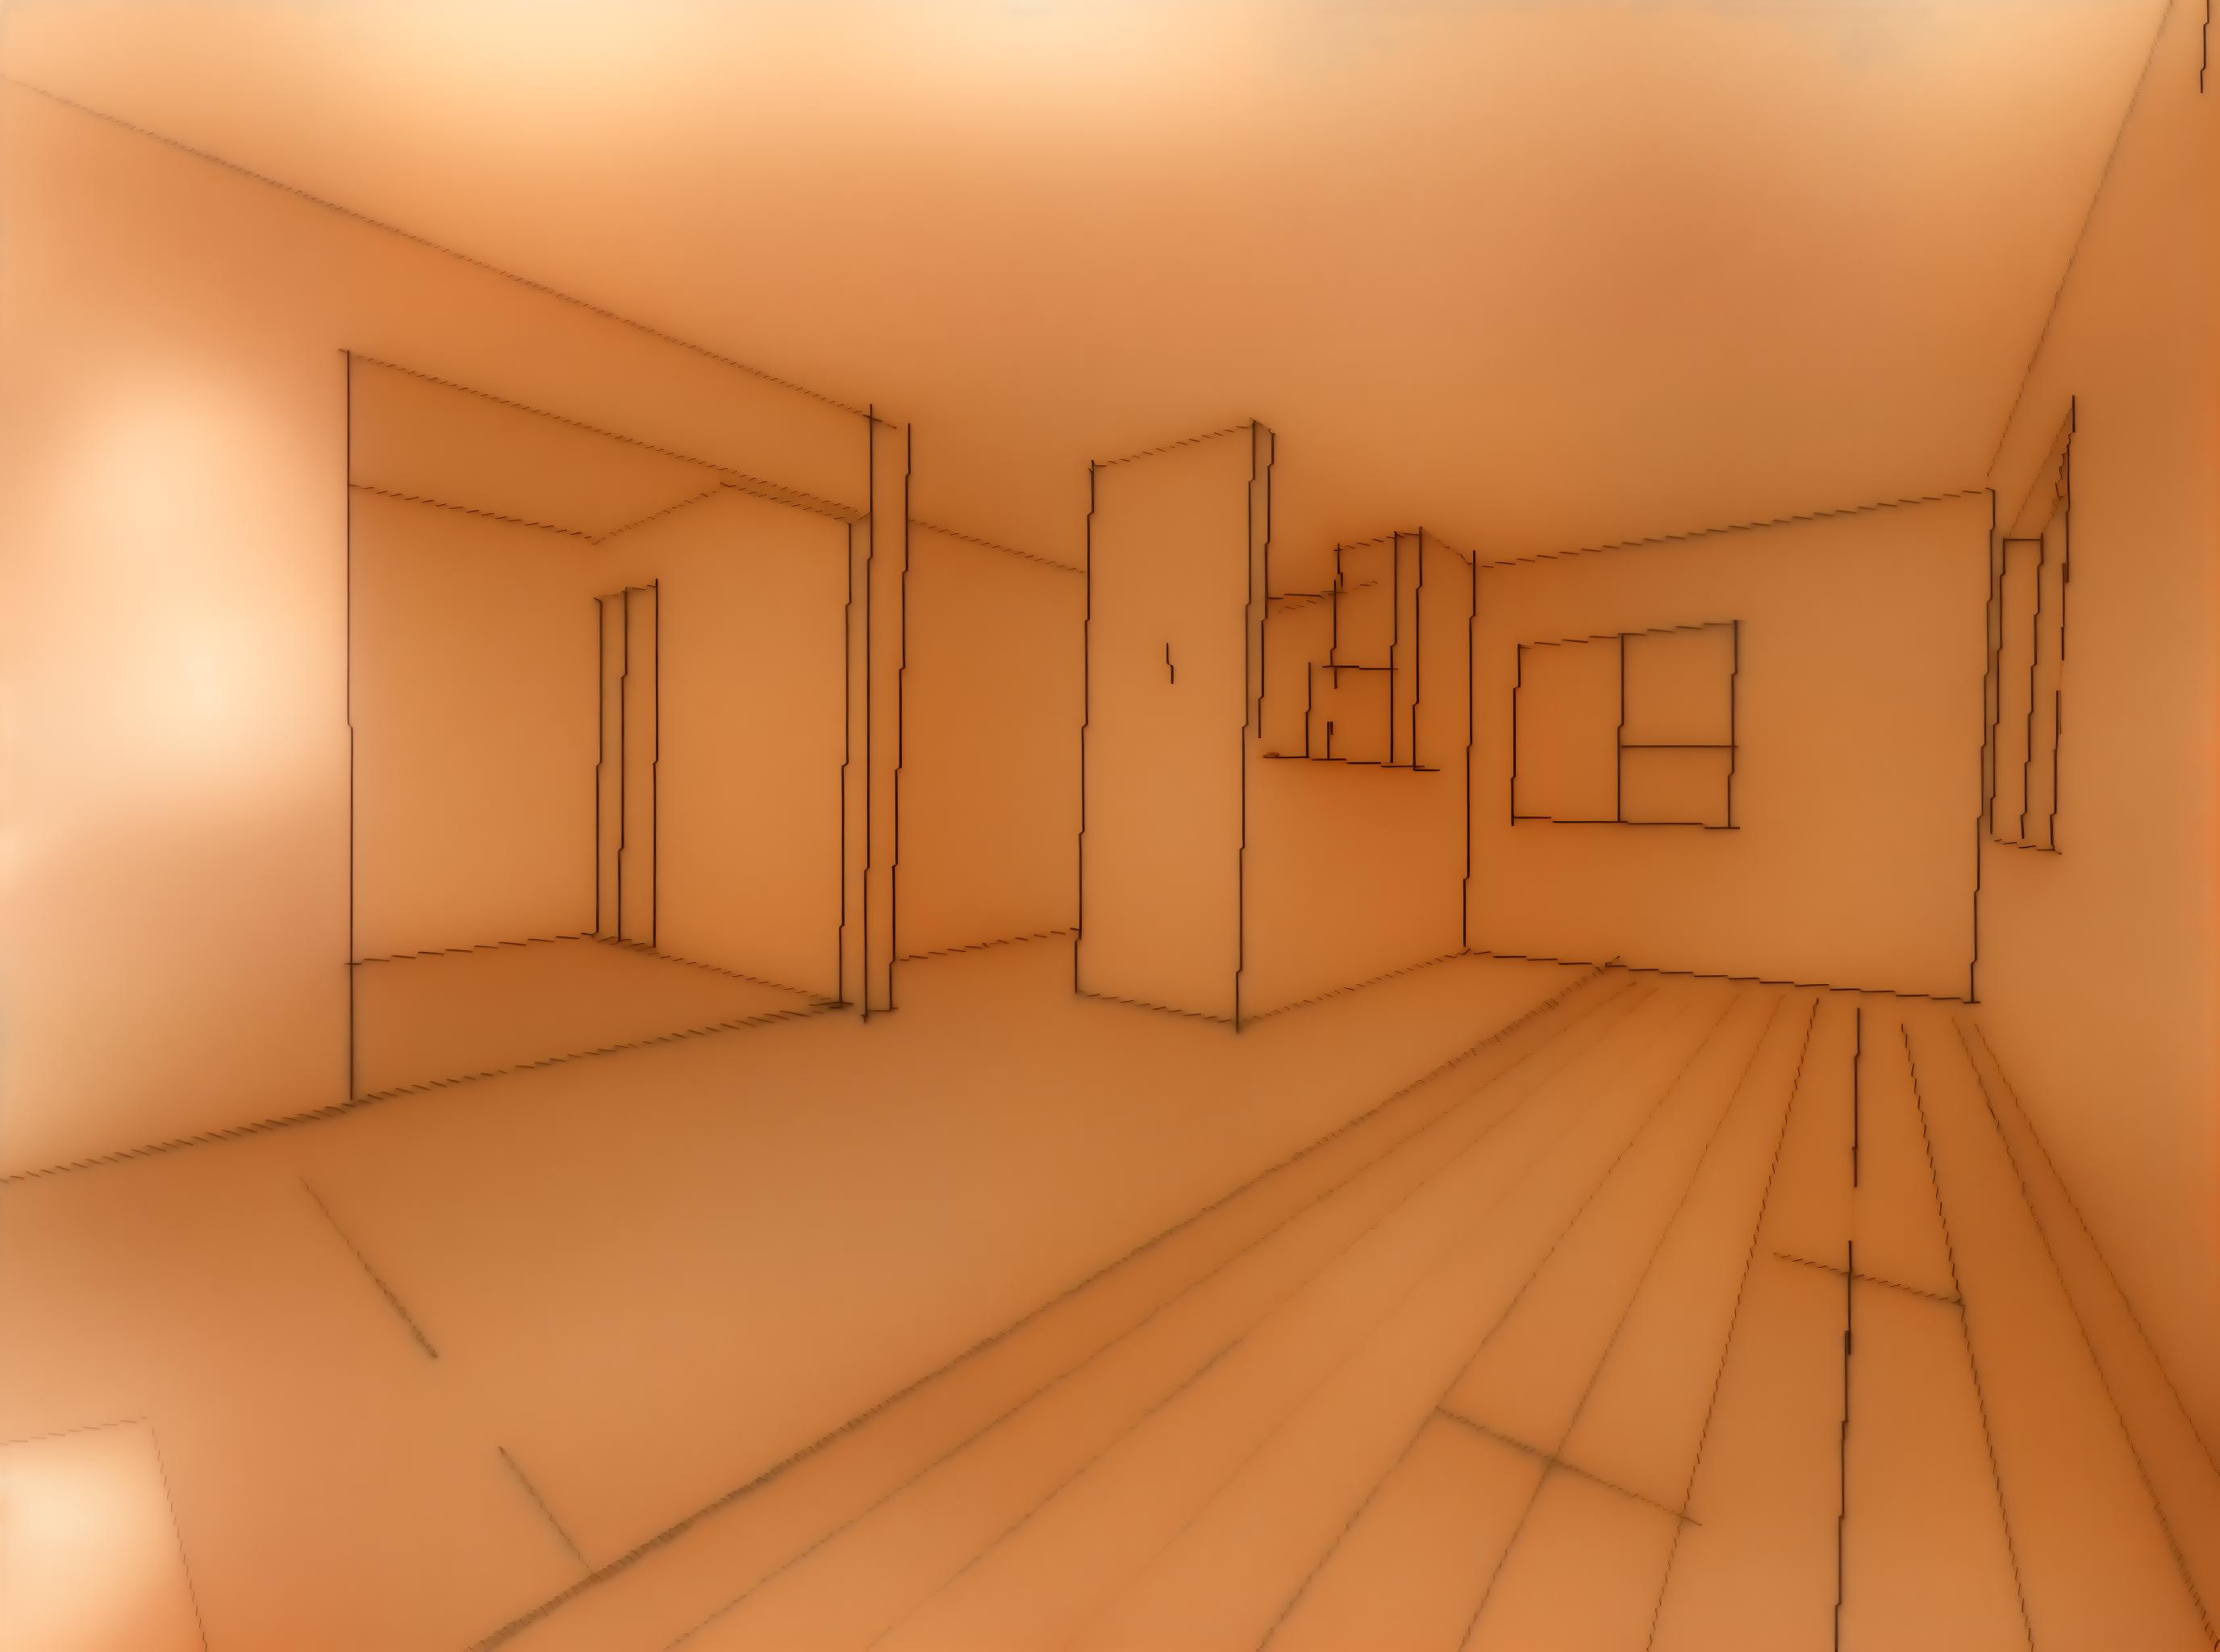  room interior, add random interior objects to the empty room, keep same room layout